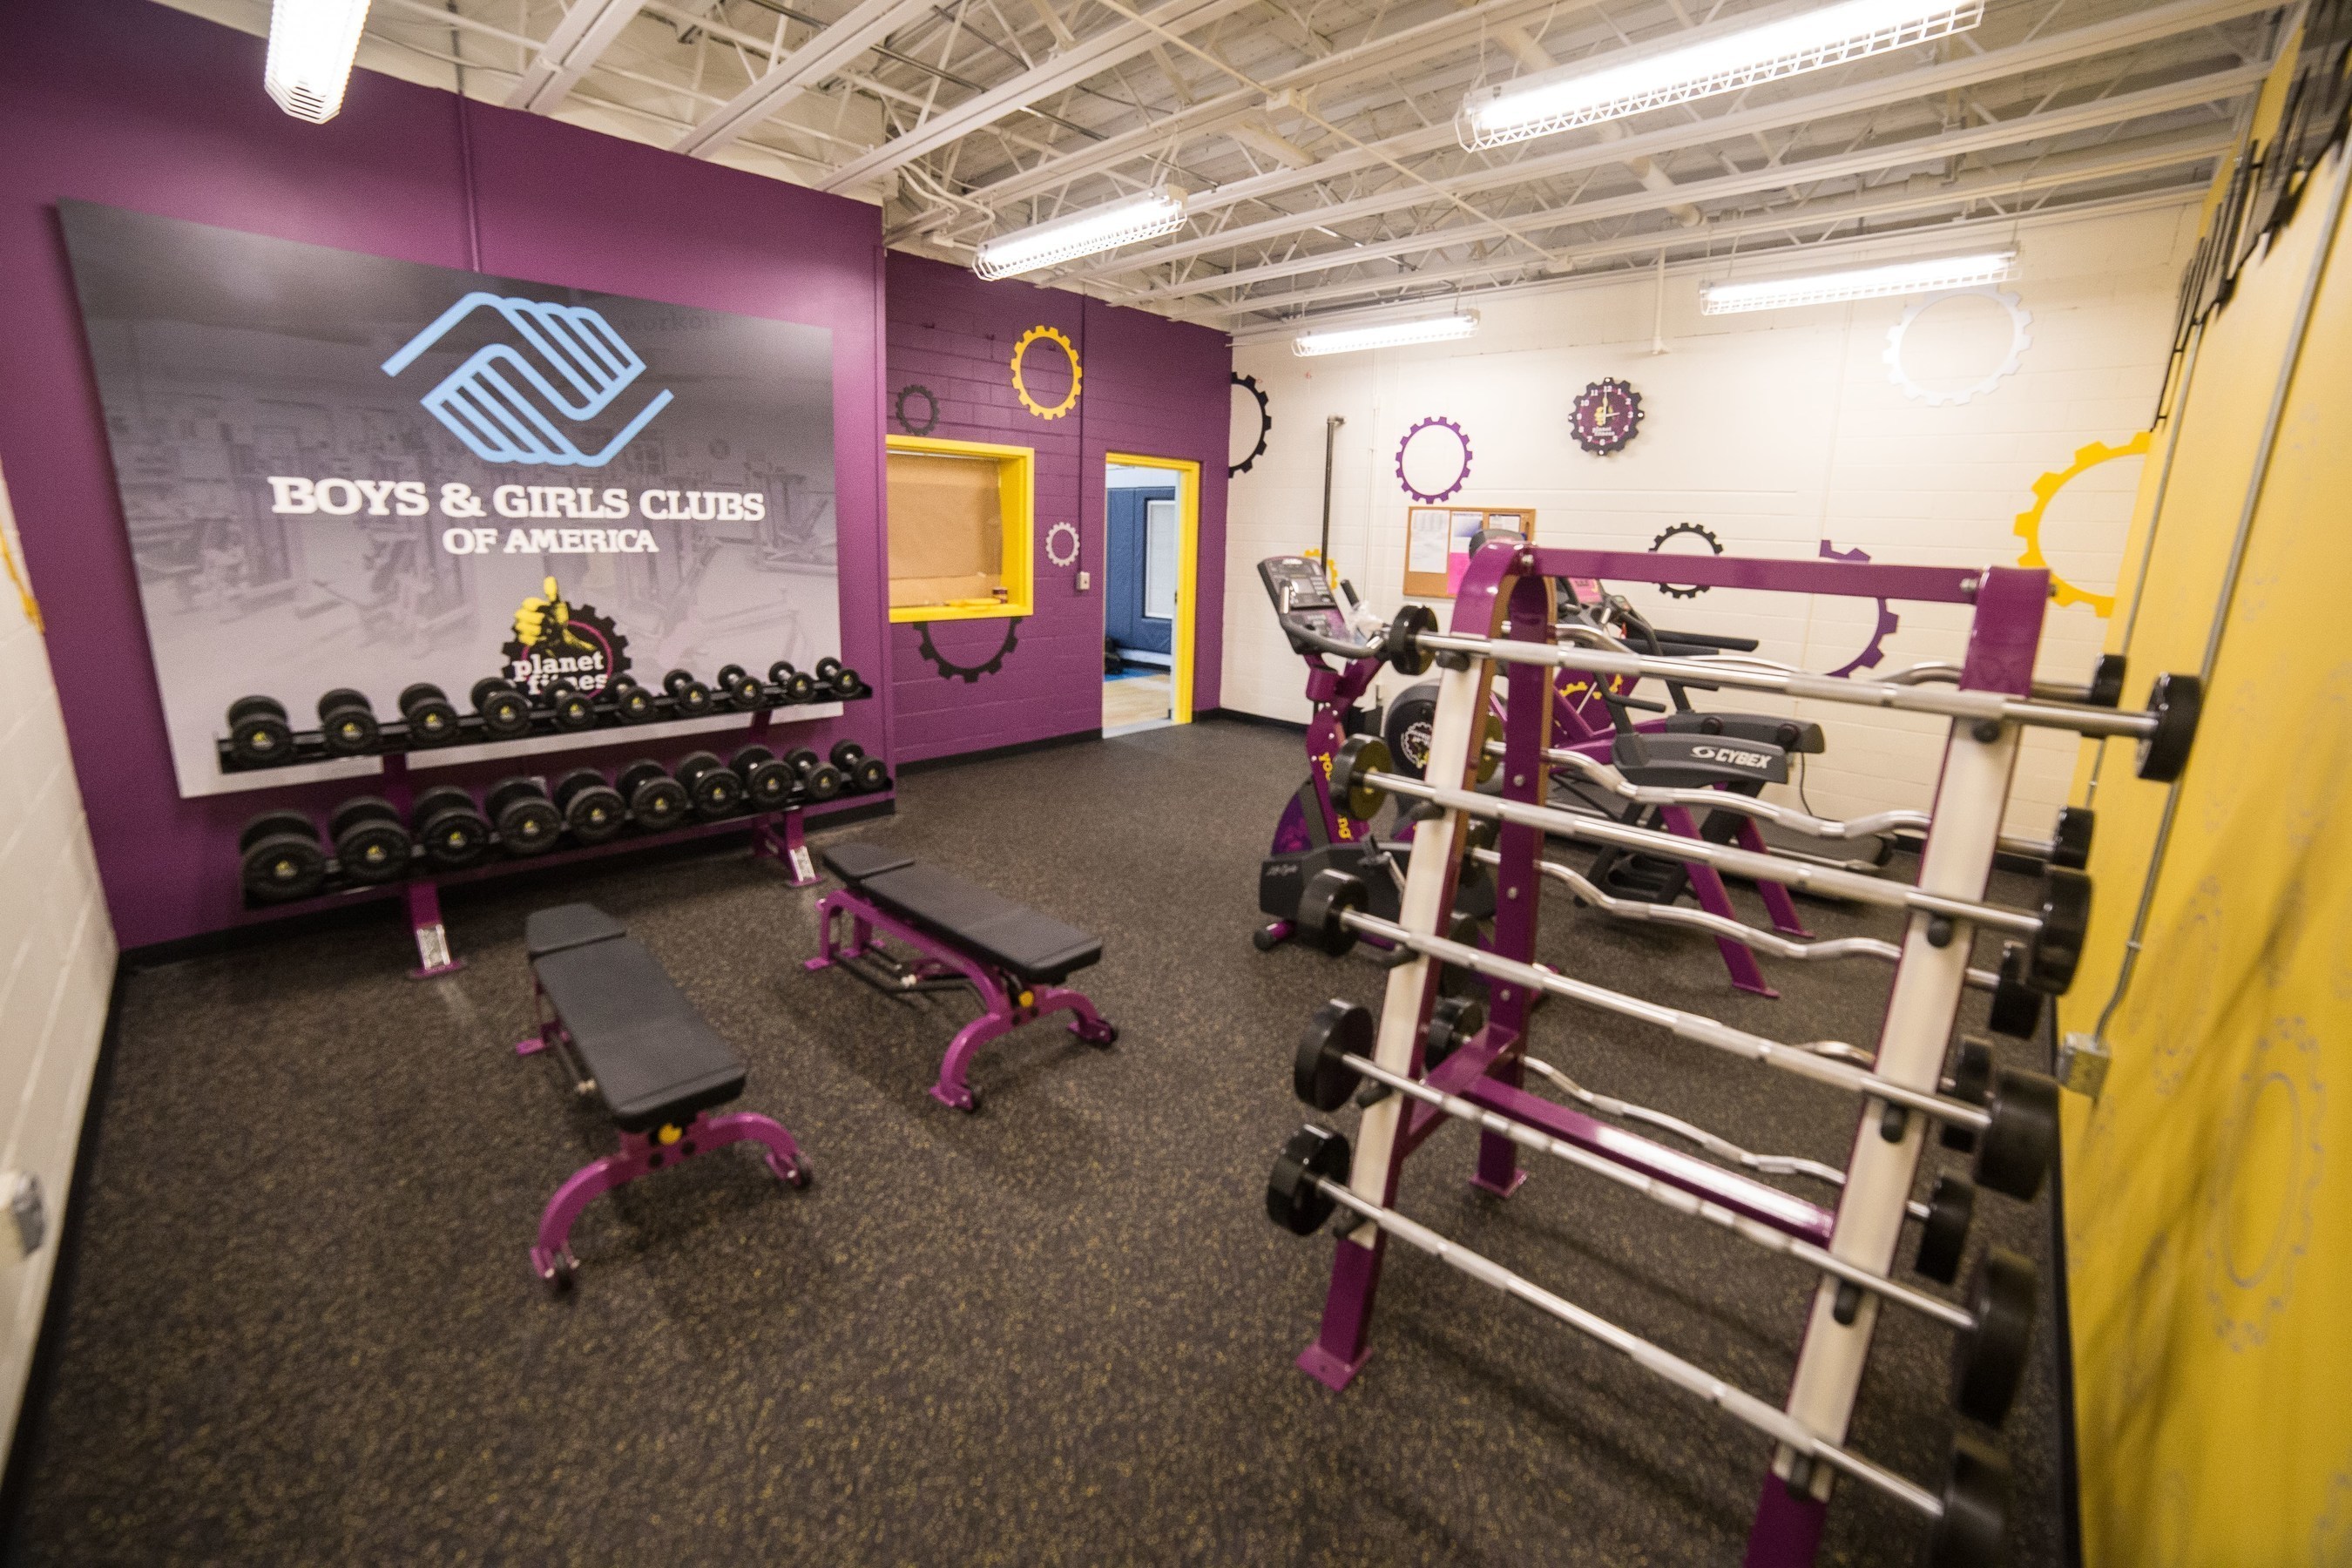 Planet Fitness builds first ever "Judgement Free" fitness center within a Boys & Girls Club as part of National Anti-Bullying Initiative